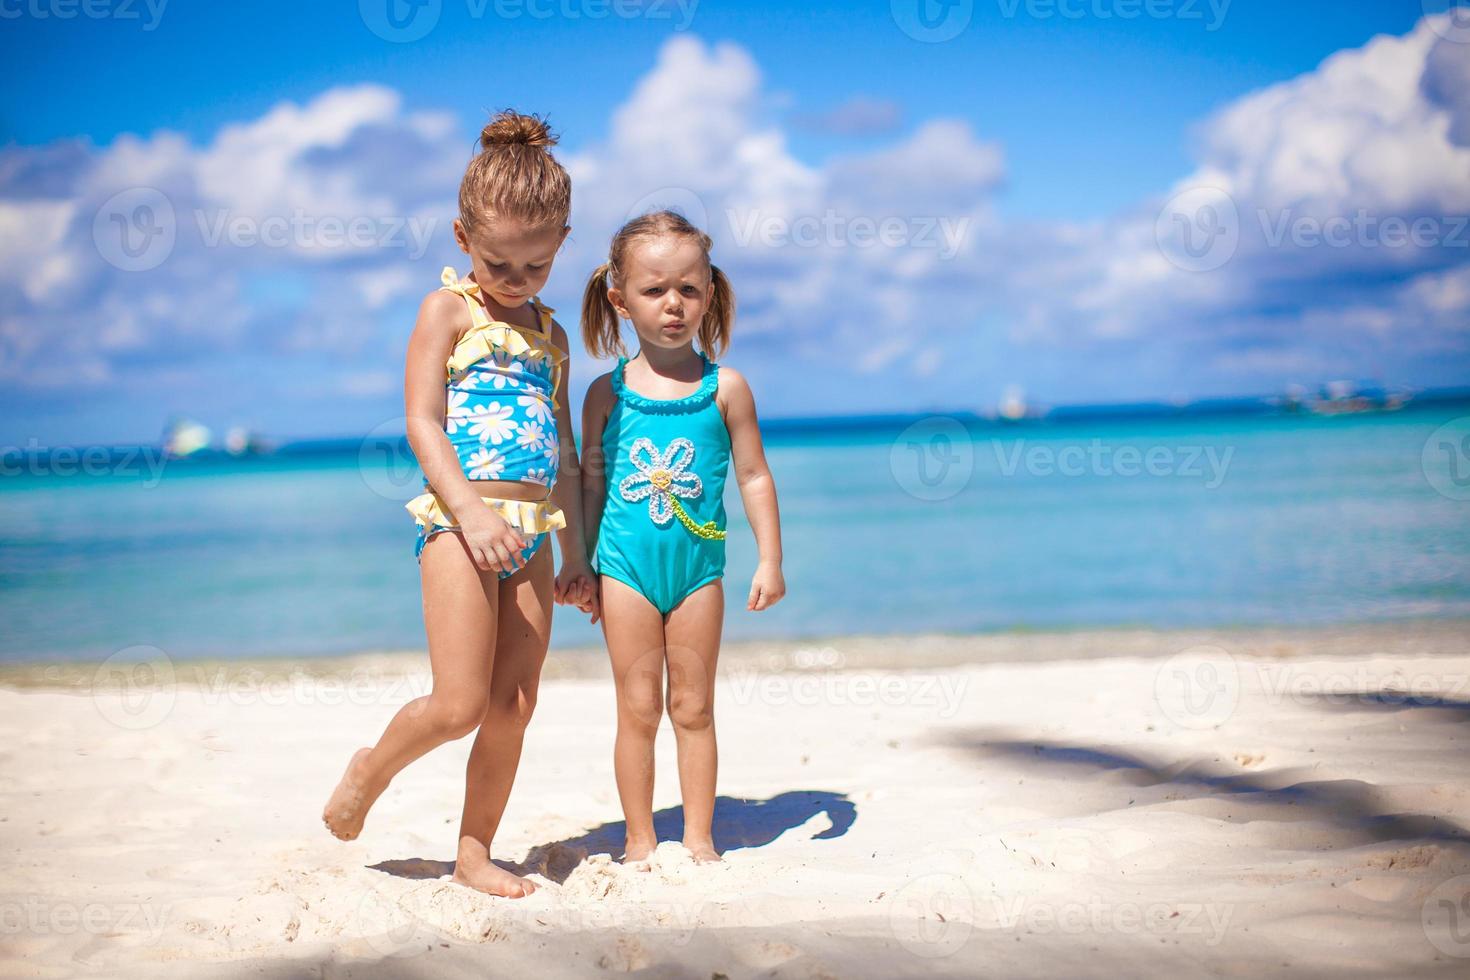 Adorable little girls at beach during summer vacation photo